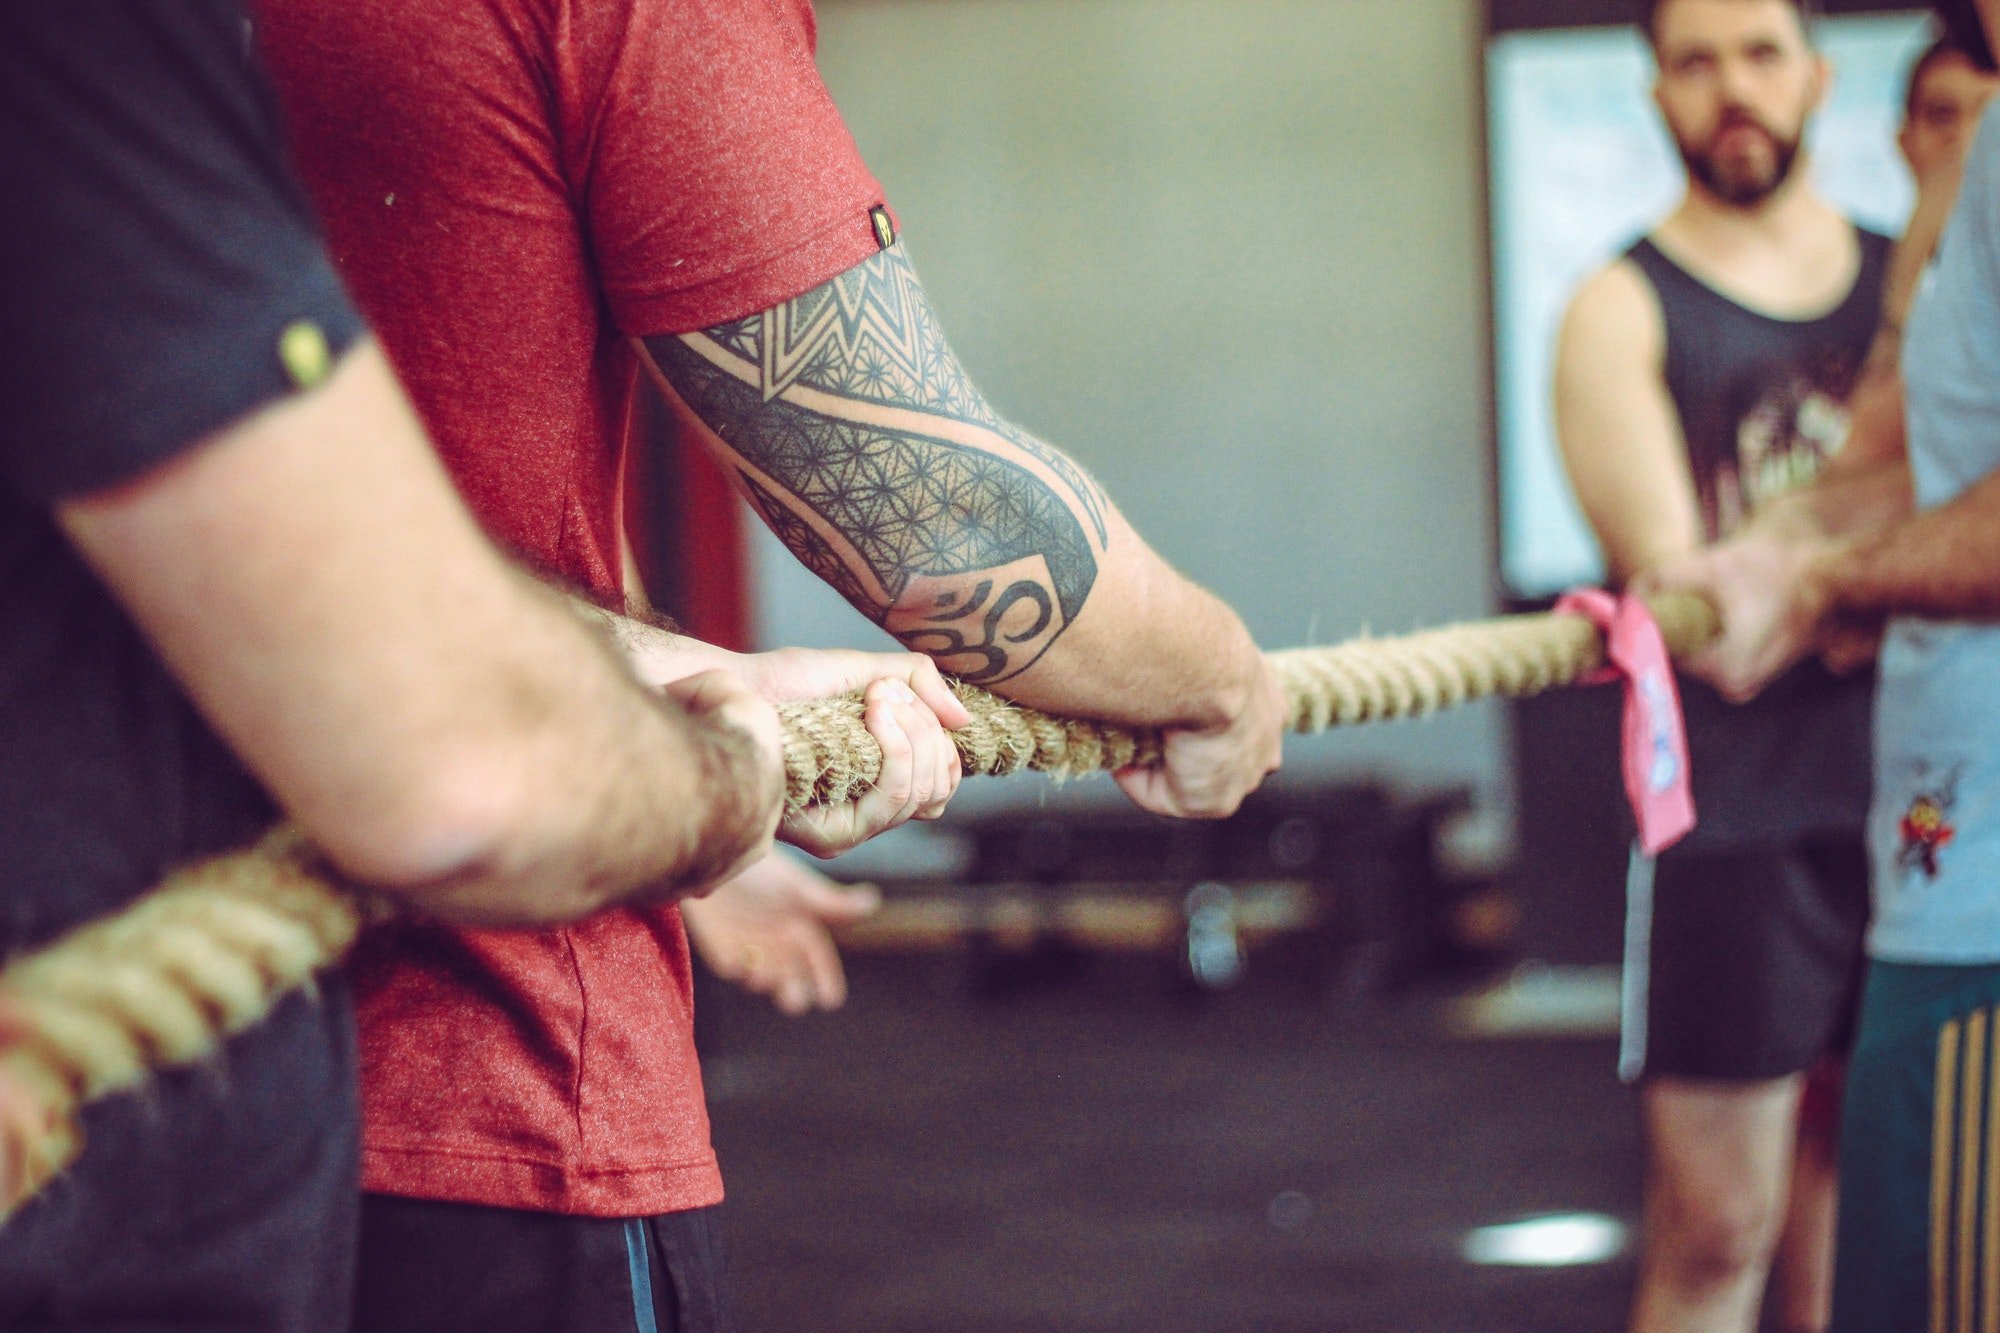 Jim and Alex challenged Peter and John's dads to a round of tug of war. | Source: Pexels